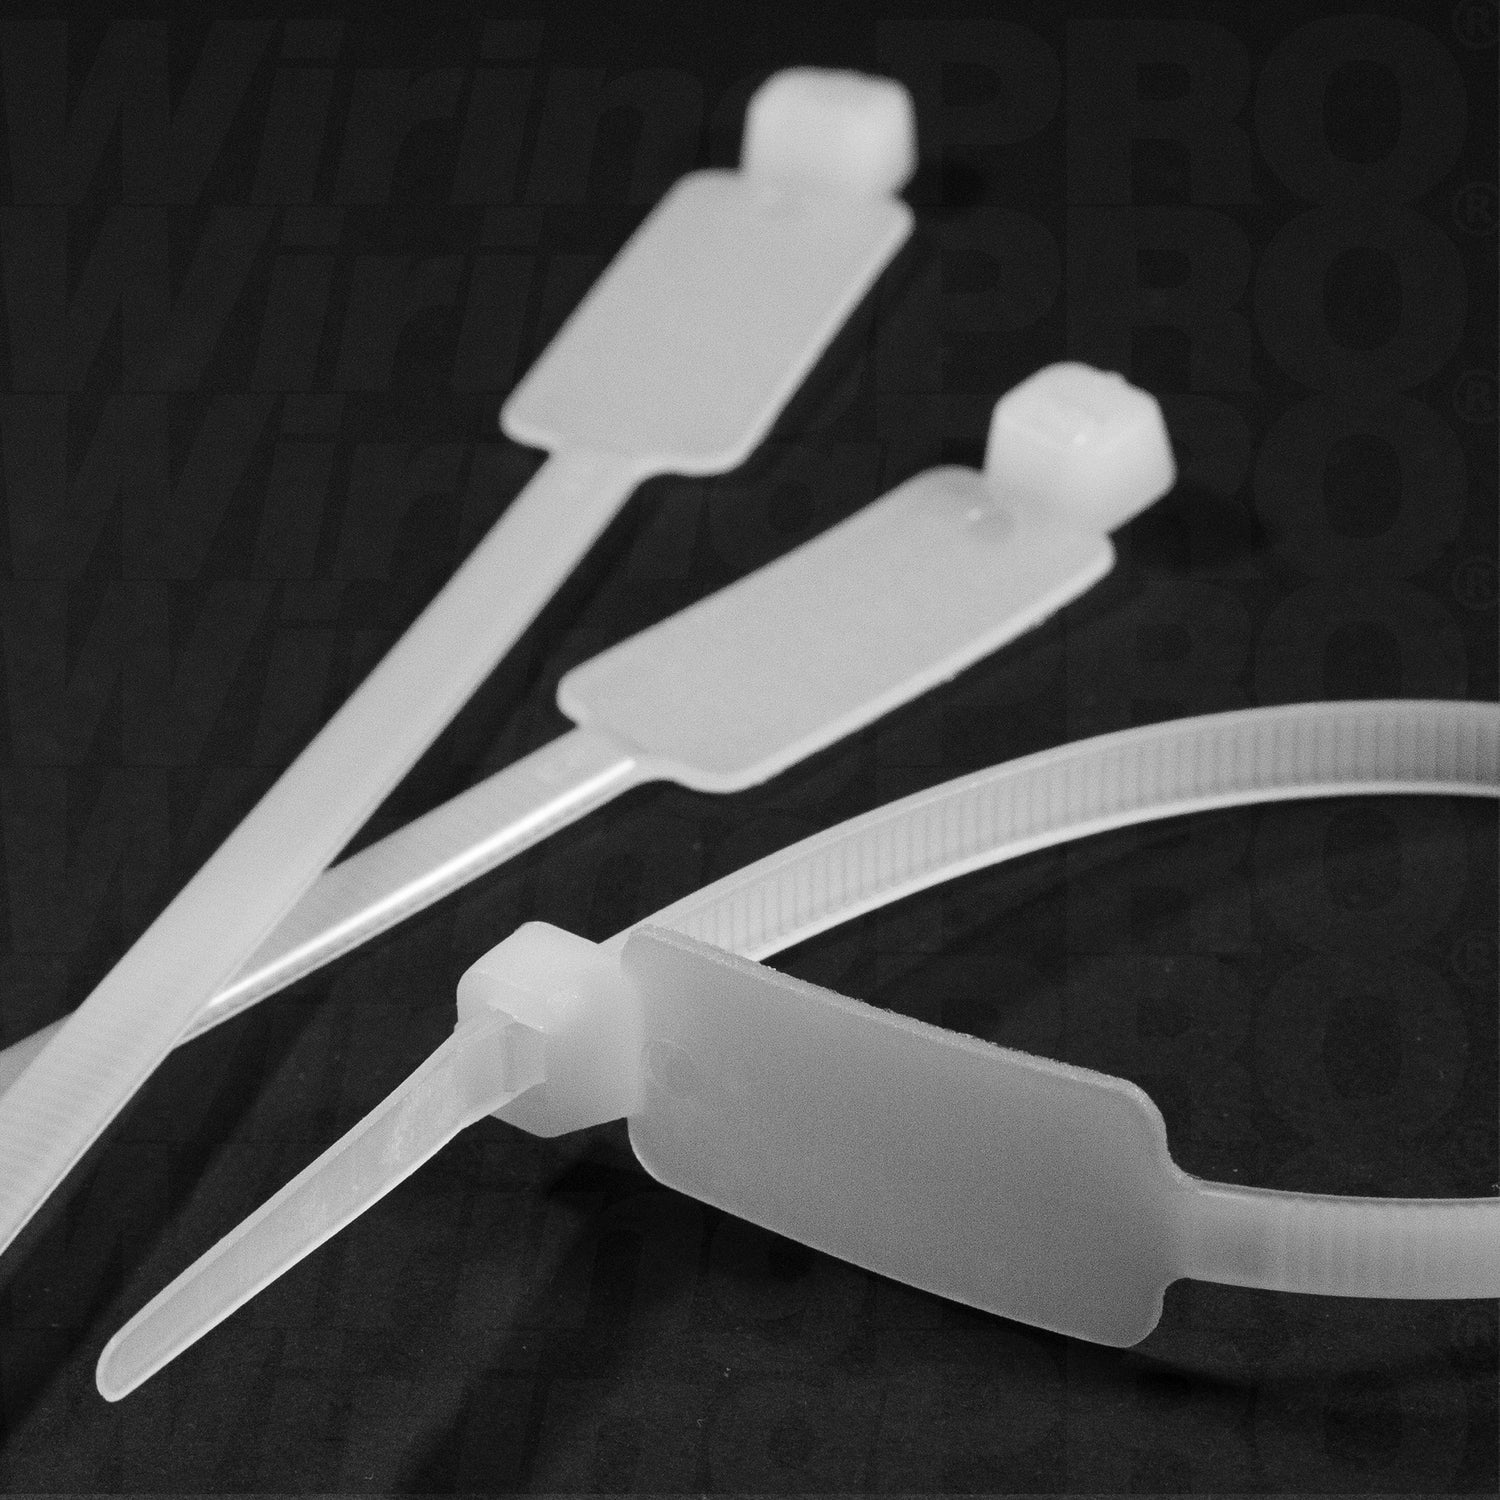 Identification + Flag Cable Ties